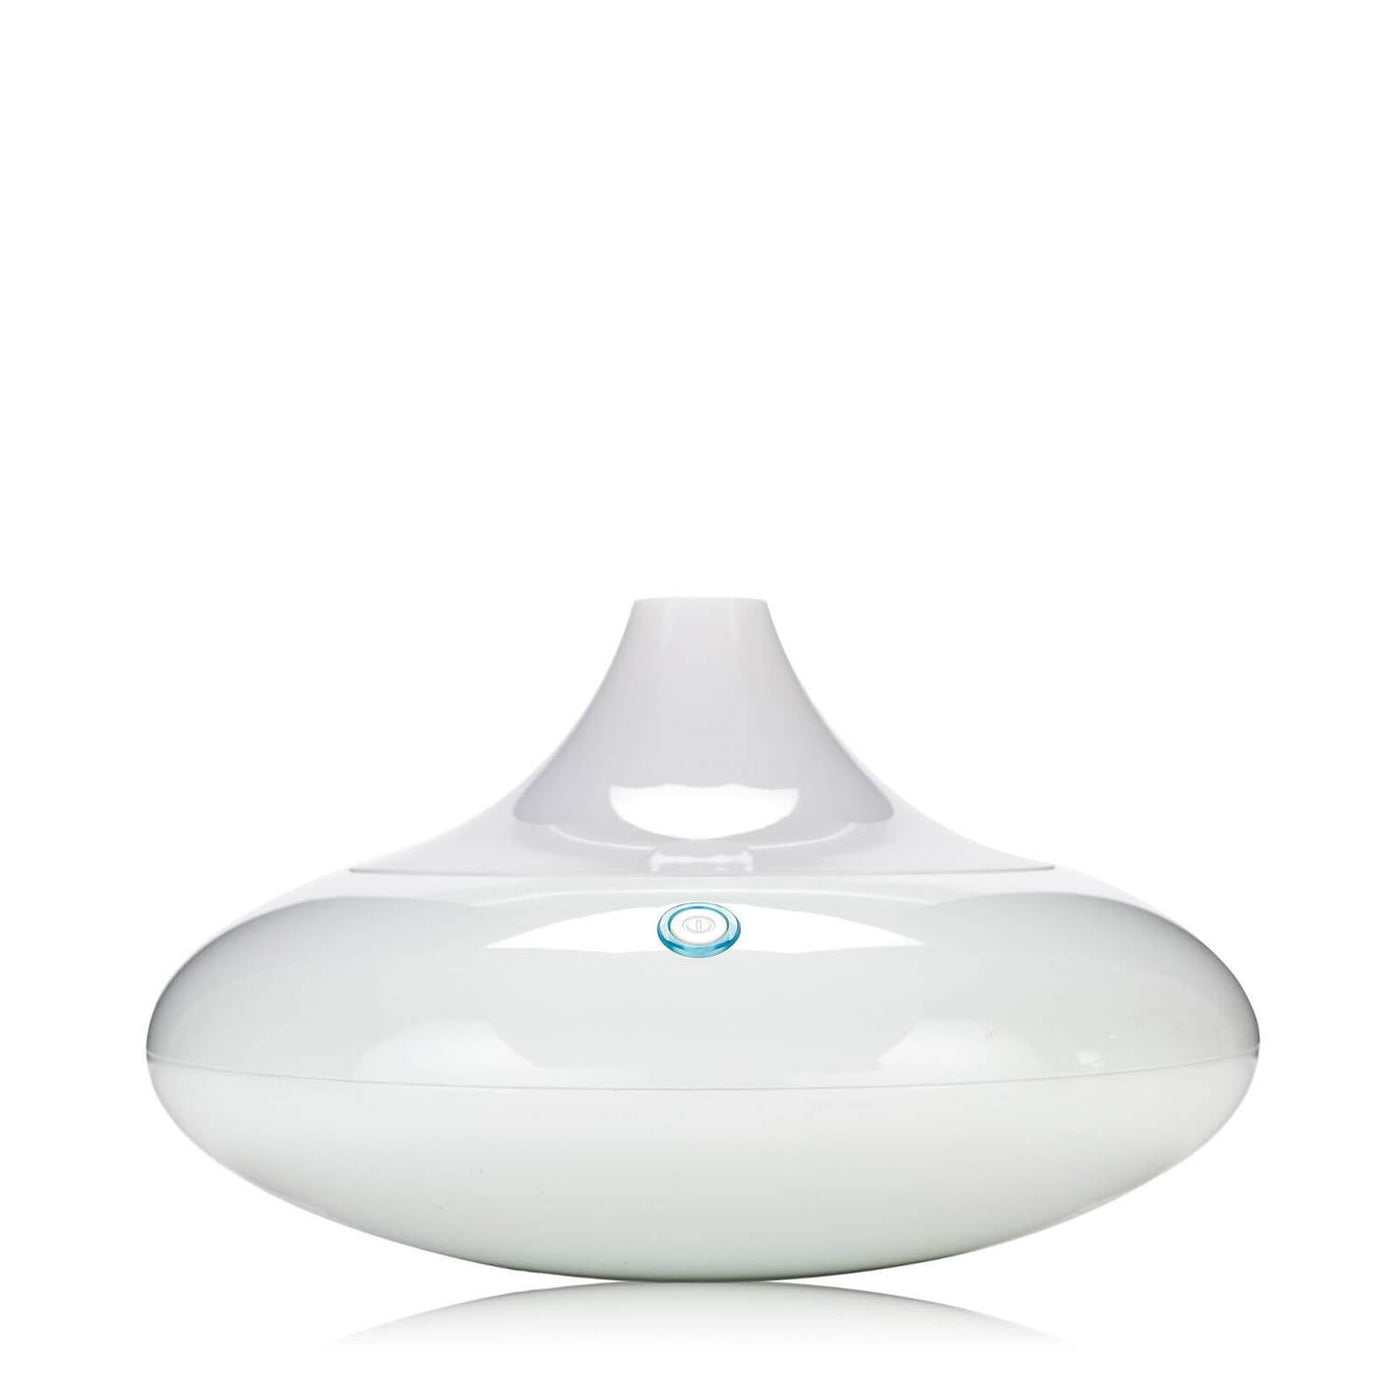 Neal's Yard Remedies Aromatherapy White Aromatherapy Essential Oil Diffuser